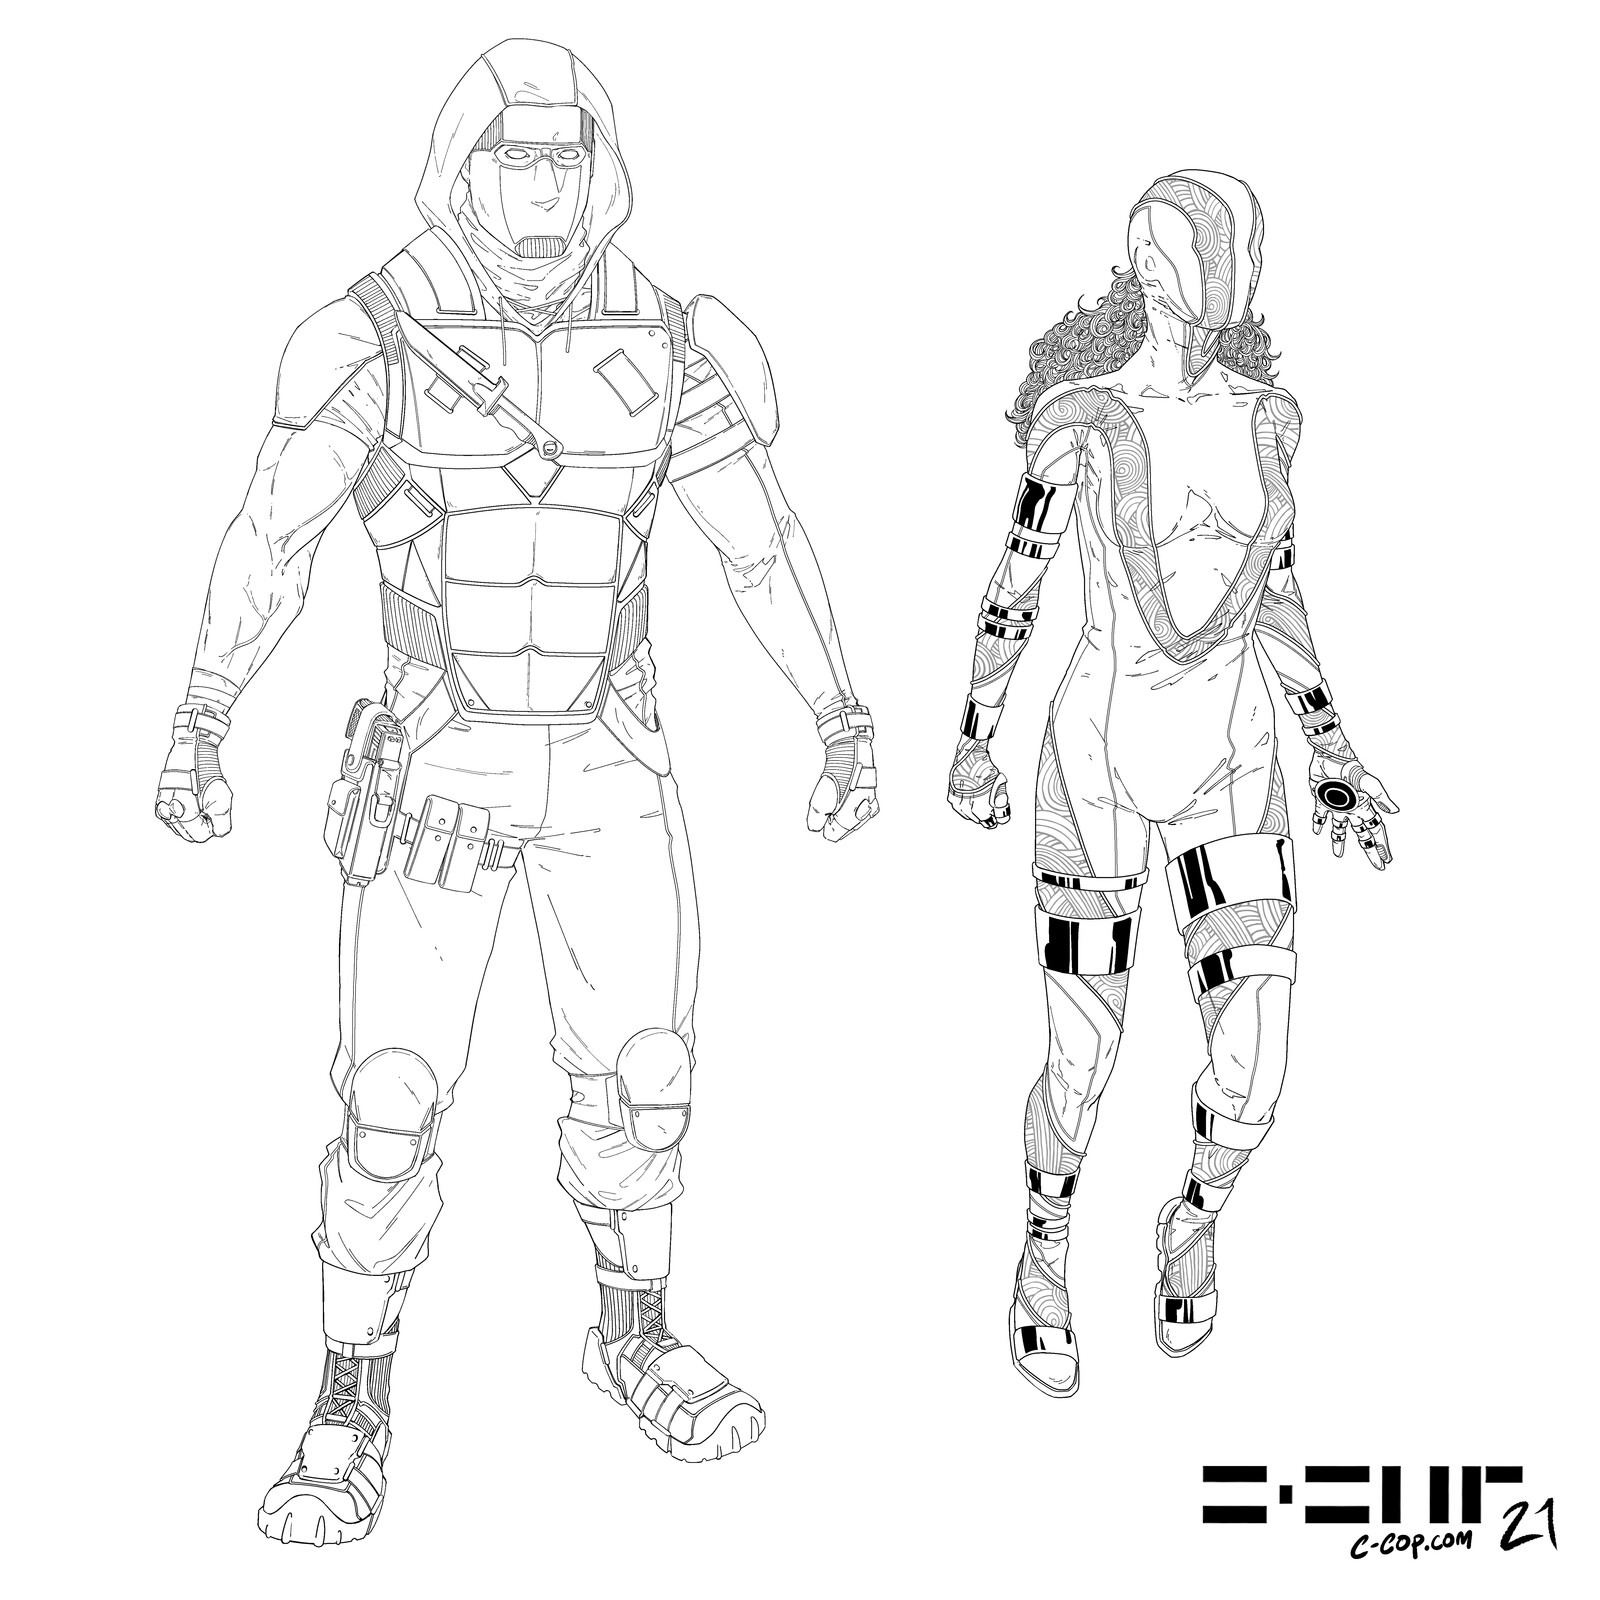 Frenzy and Pulse Costume Design (Line Art)